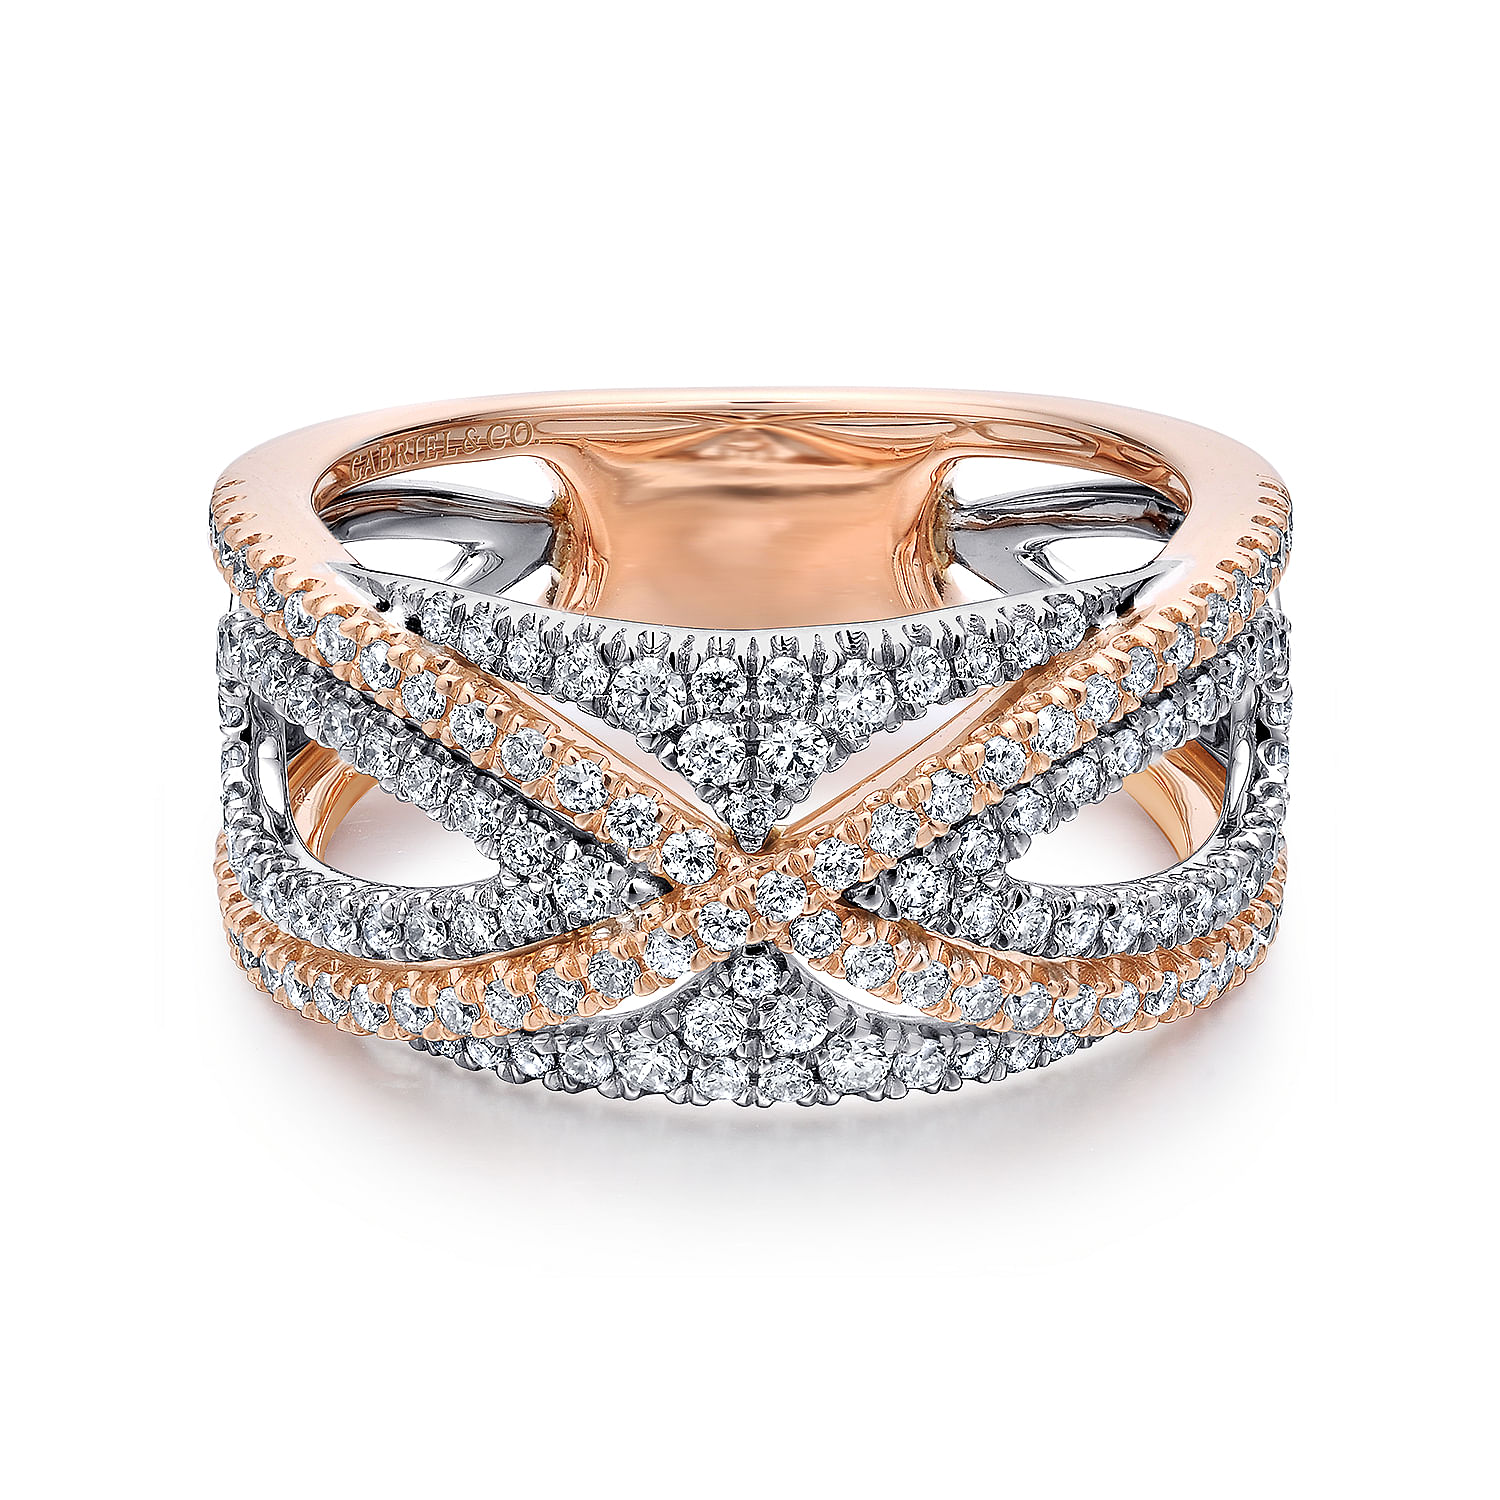 Gabriel - Wide 14K White and Rose Gold French Pavé Set Diamond Anniversary Band